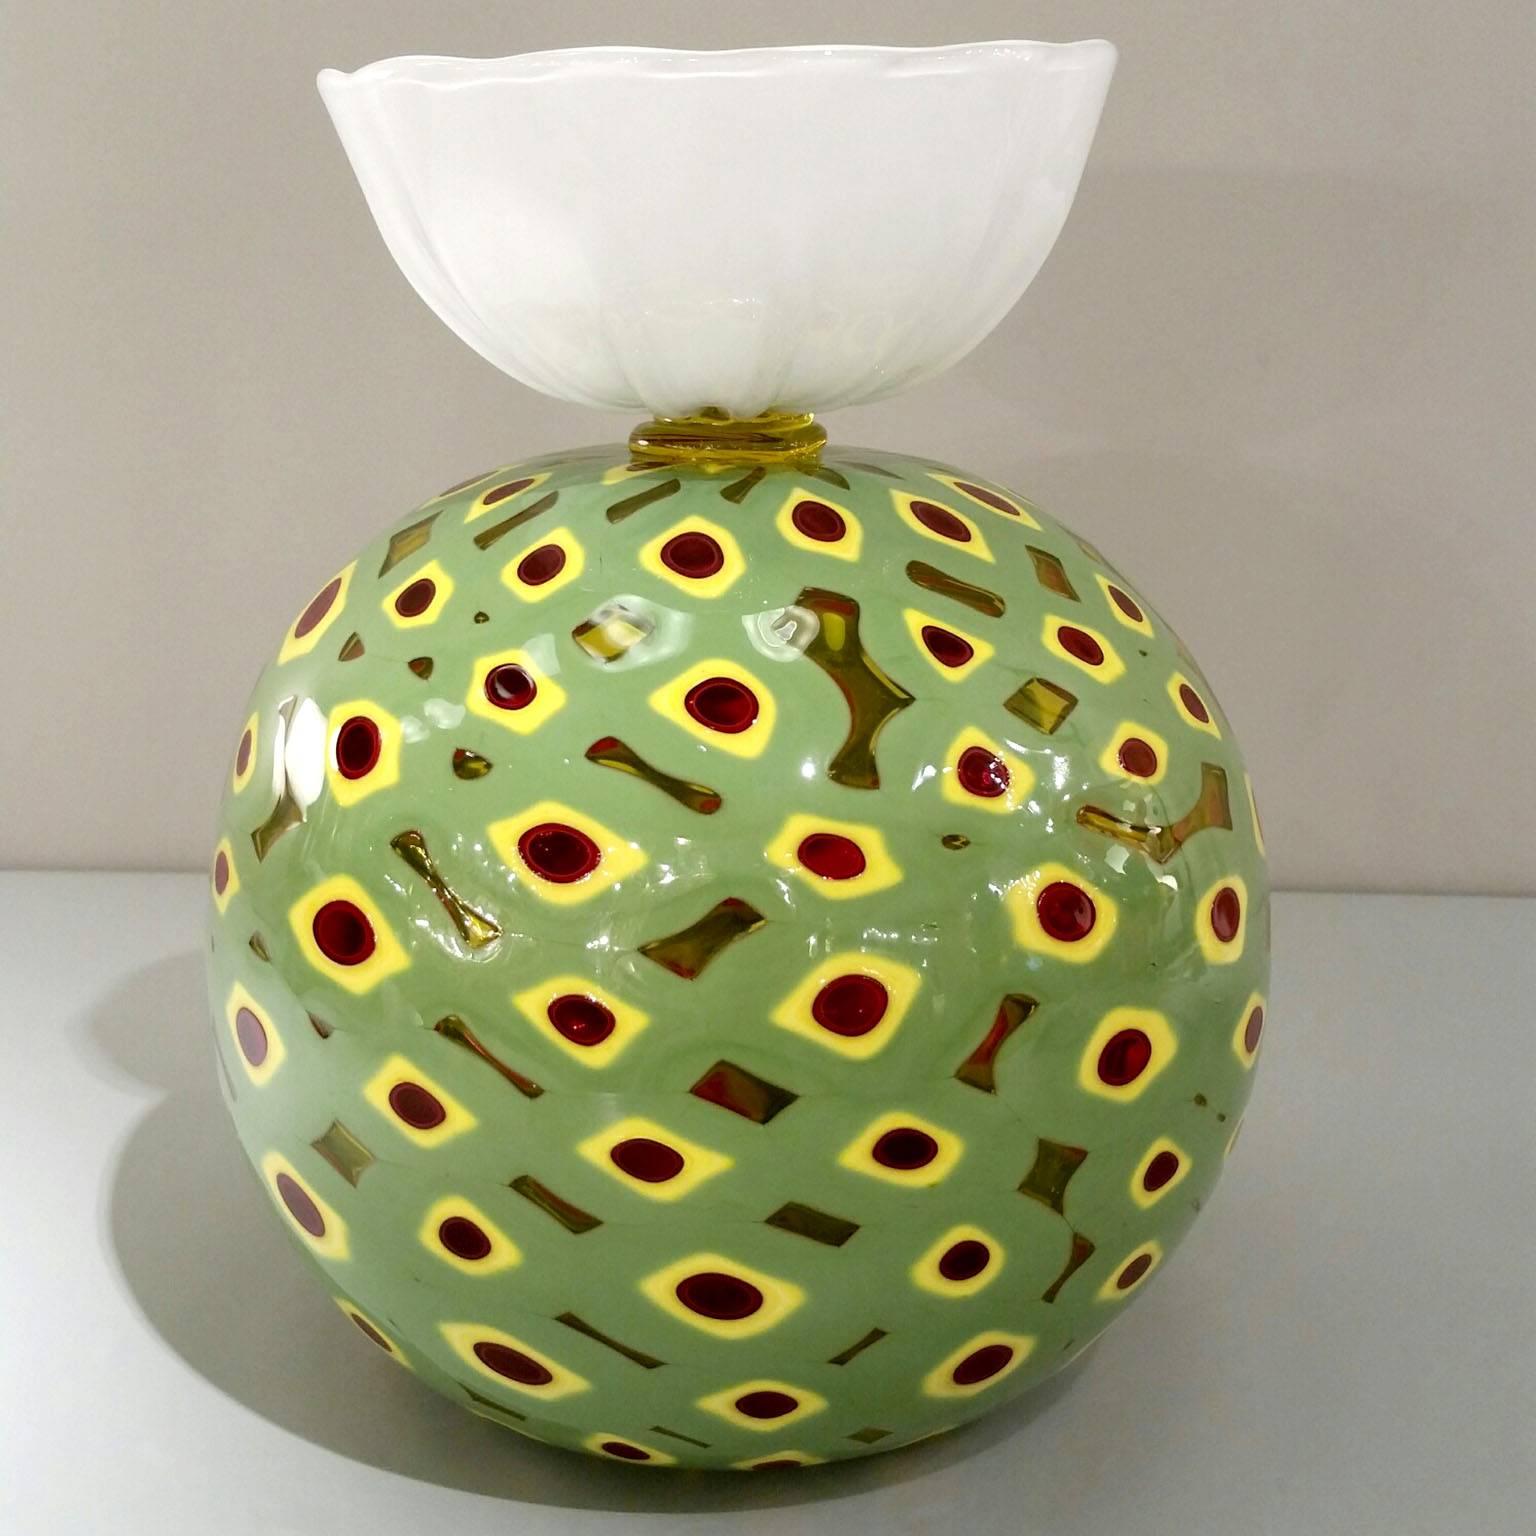 This unique piece belongs to a very famous series designed by Flo Perkins for Venini in 2007
Blown handmade glass sculpture in yellow and glass green color.
Multicolored 